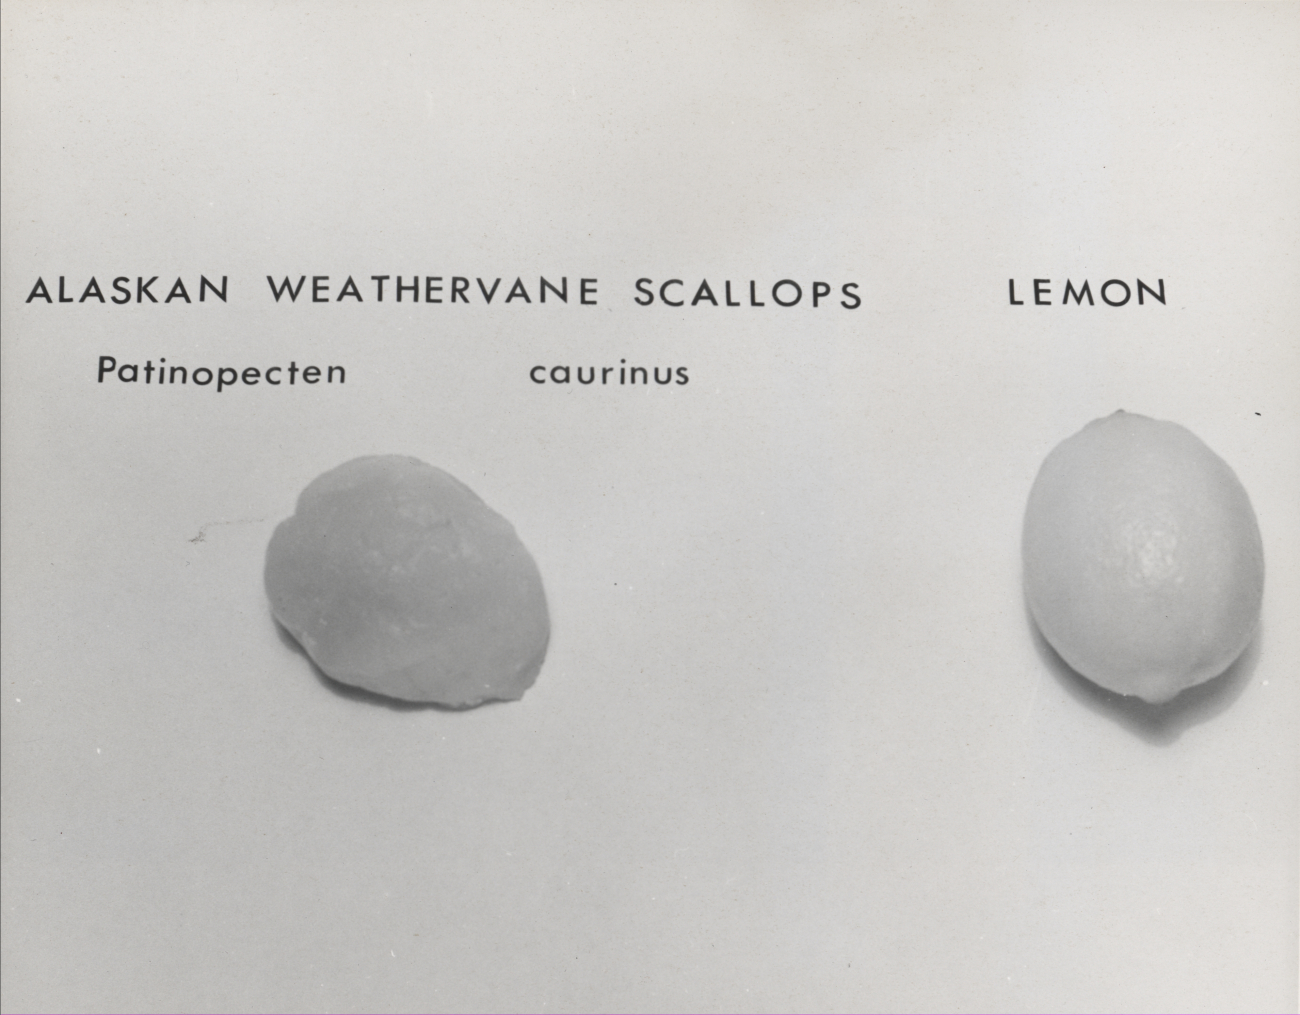 Alaskan weathervane scallop (Patinopecten caurinus) and  lemon for comparison with edible meat